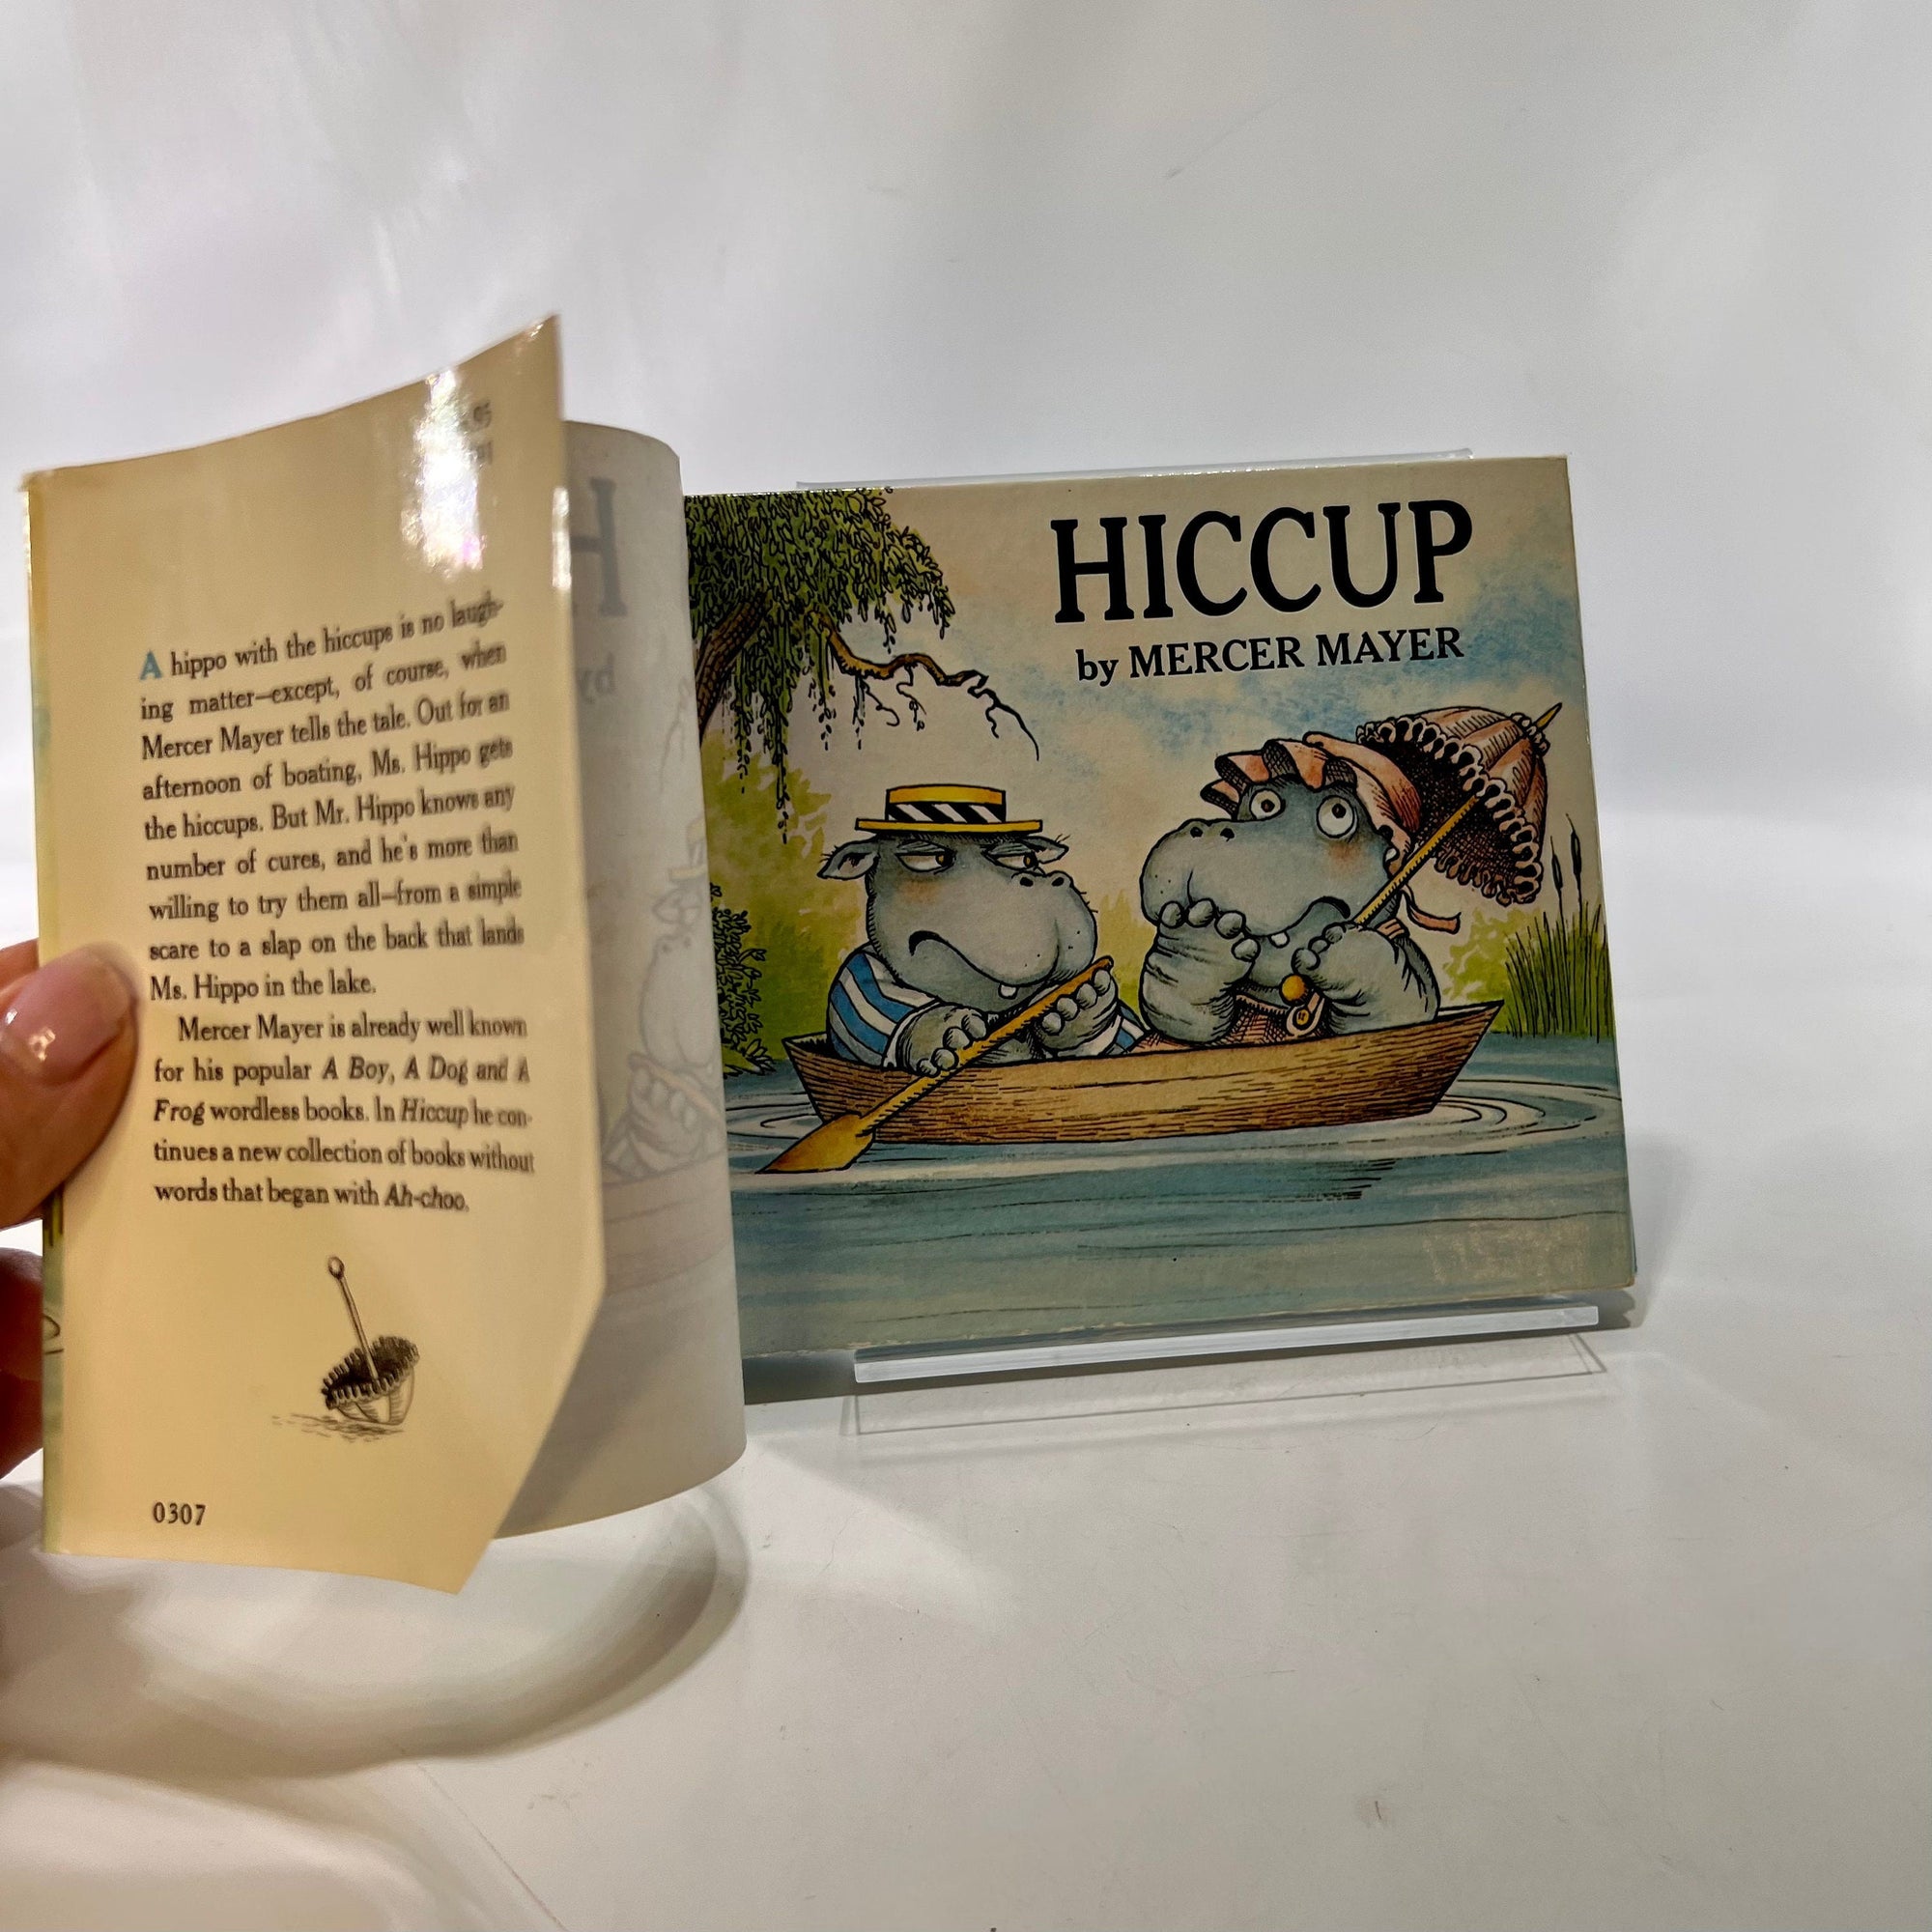 Hiccup by Mercer Mayer 1976 Dial PressVintage Book